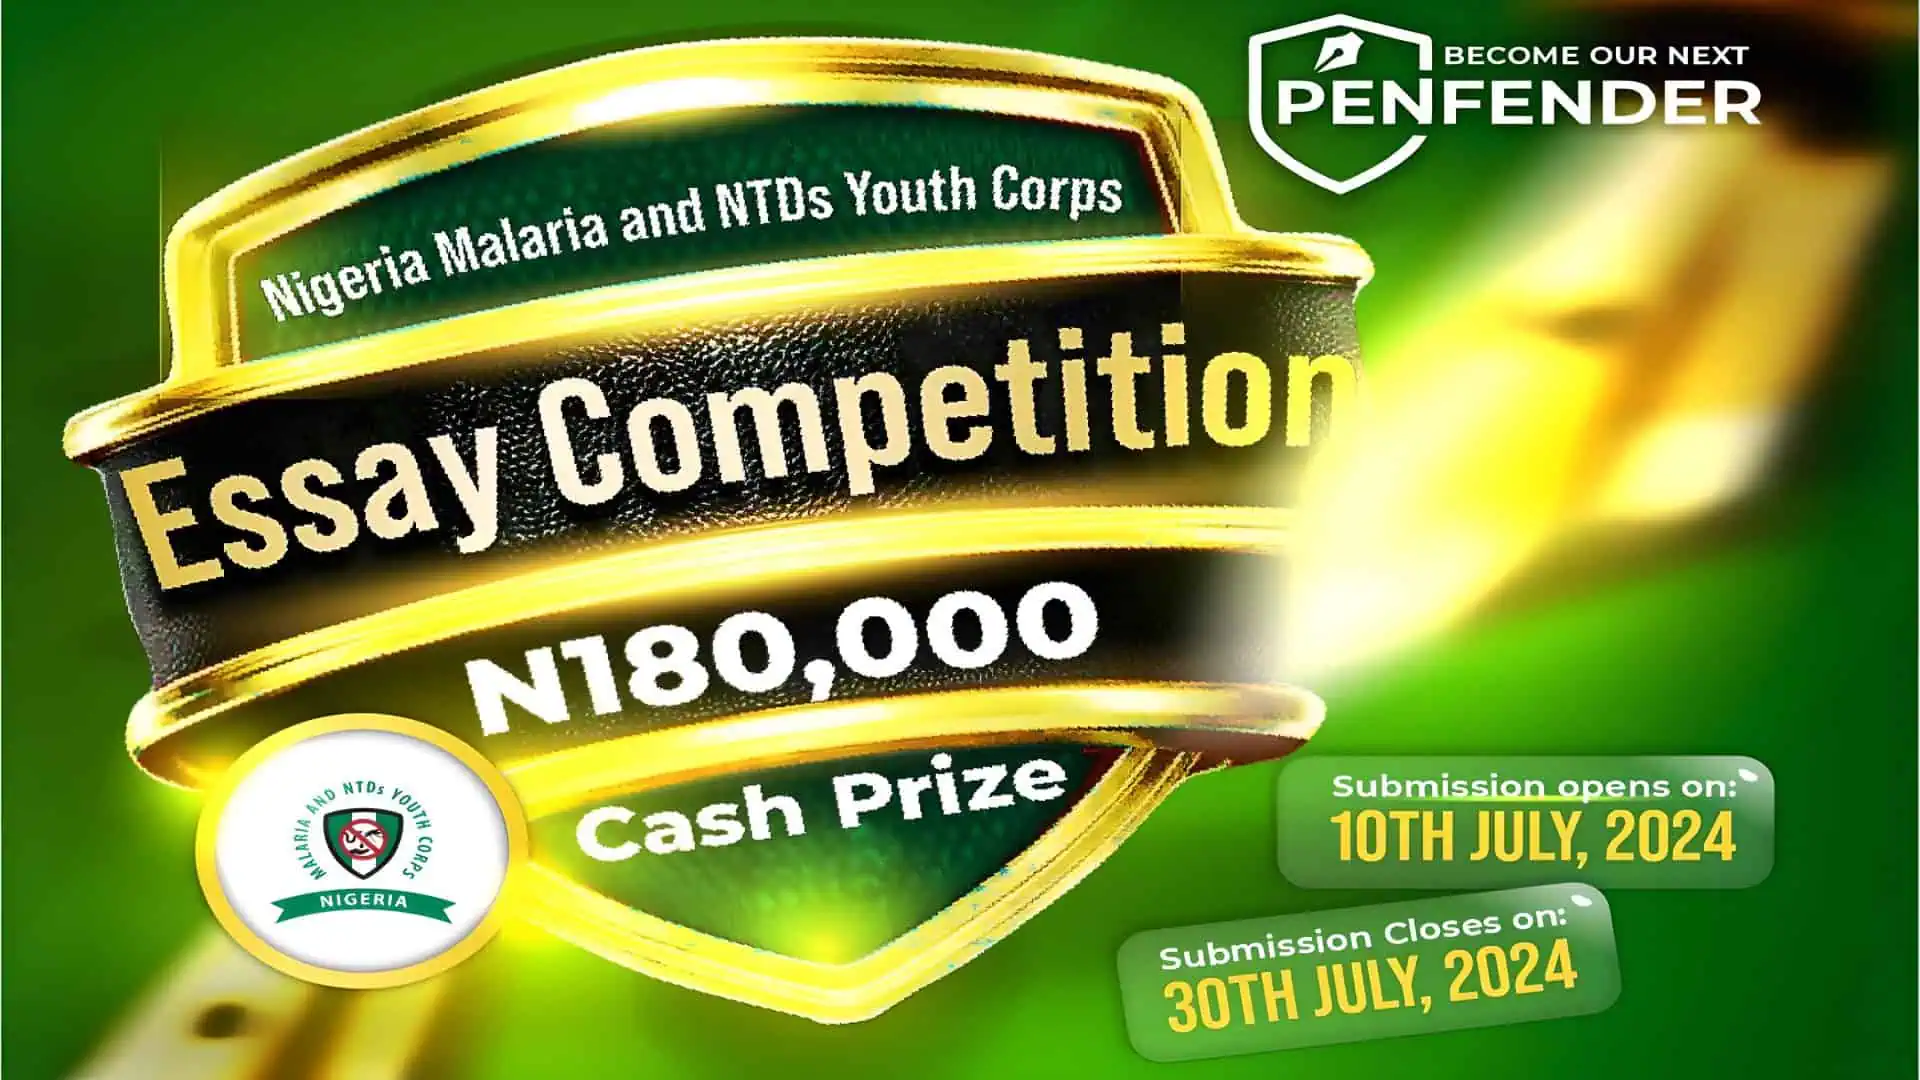 Nigeria Malaria and NTDS Youth Corps Essay Competition